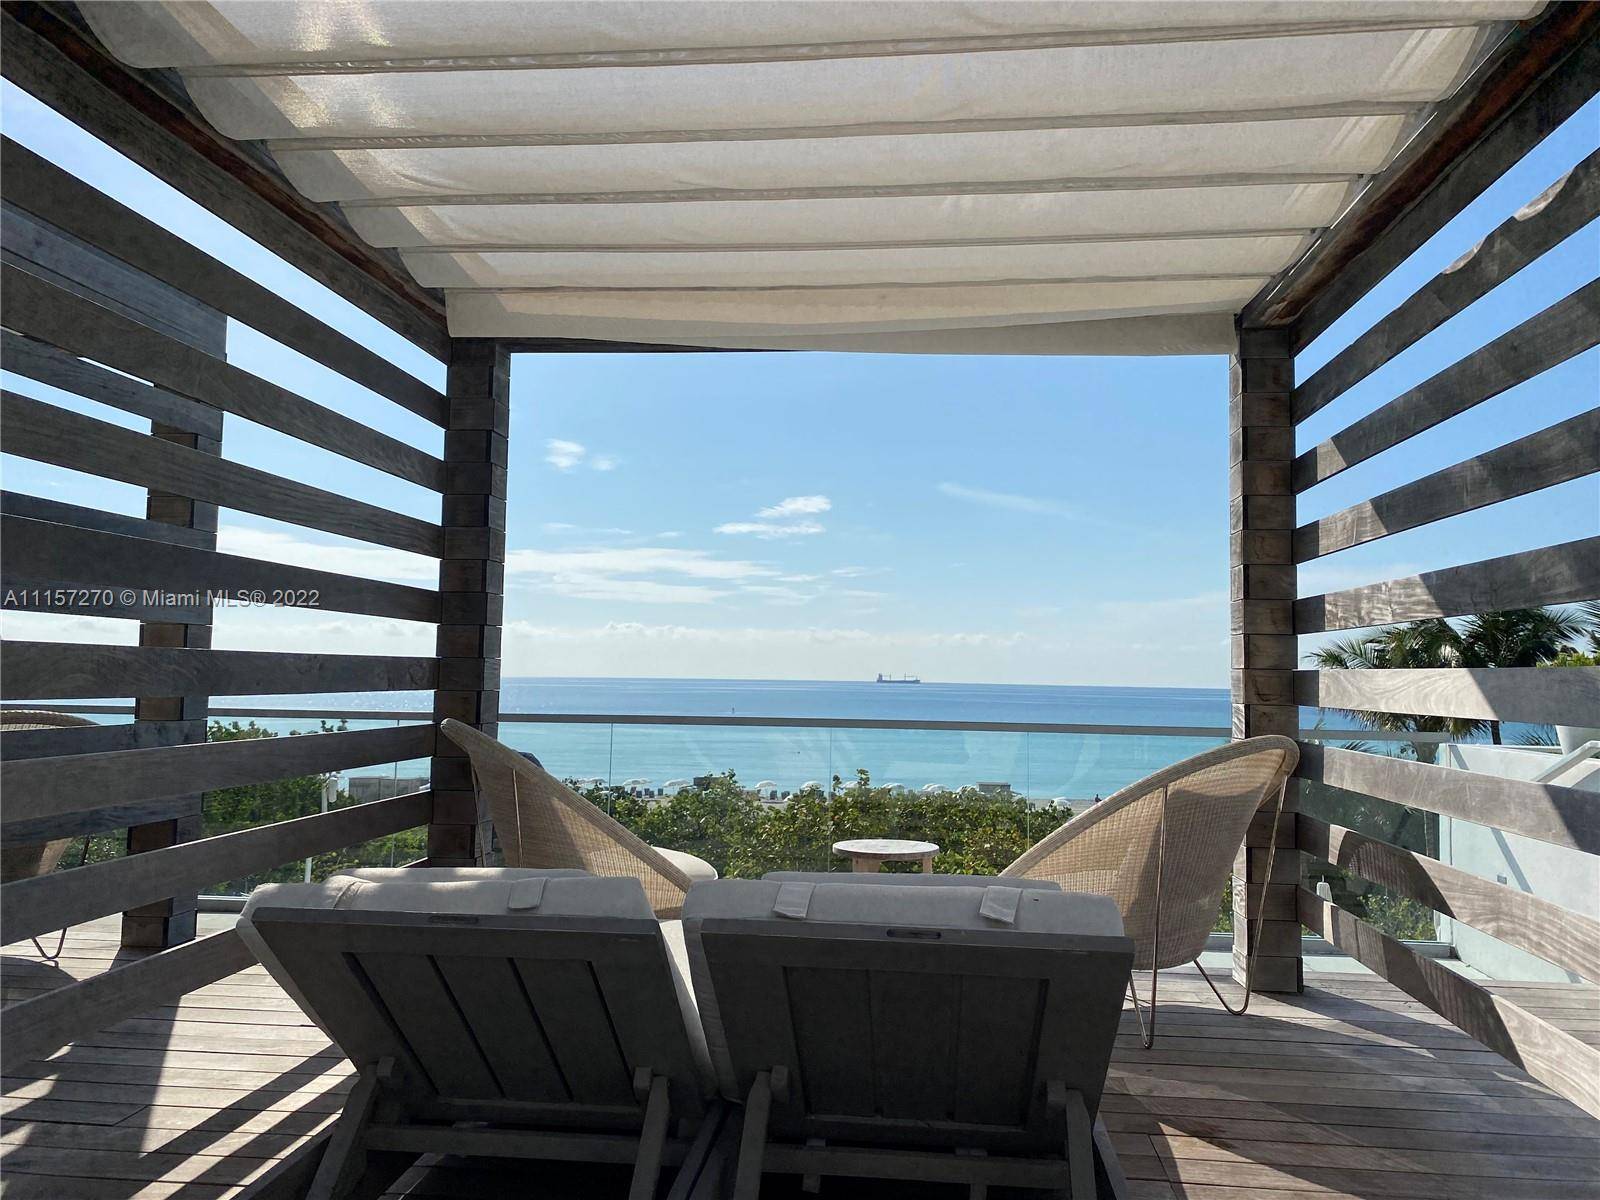 OCEANFRONT RESORT STYLE CONDO THAT SHARES AMENITIES WITH 1 HOTEL, THIS CORNER UNIT 2BED 1BATH with BALCONY FACES WEST, FULLY FURNISHED, 3 POOLS AND JACUZZI CURRENTLY 1 of THE POOLS ...